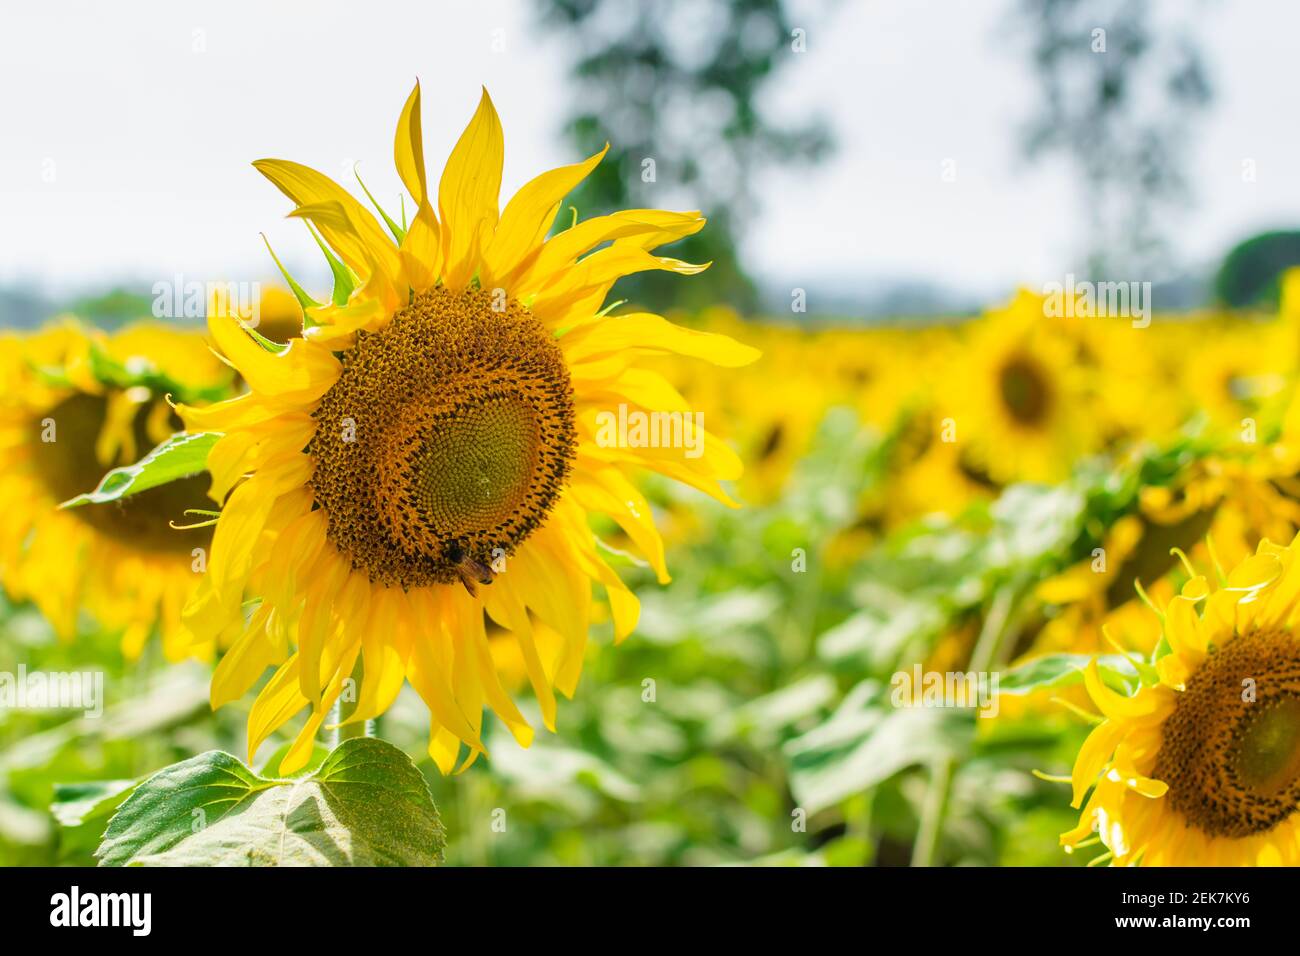 Sunflower in the sunflower cultivated agricultural field with selective focus. Stock Photo